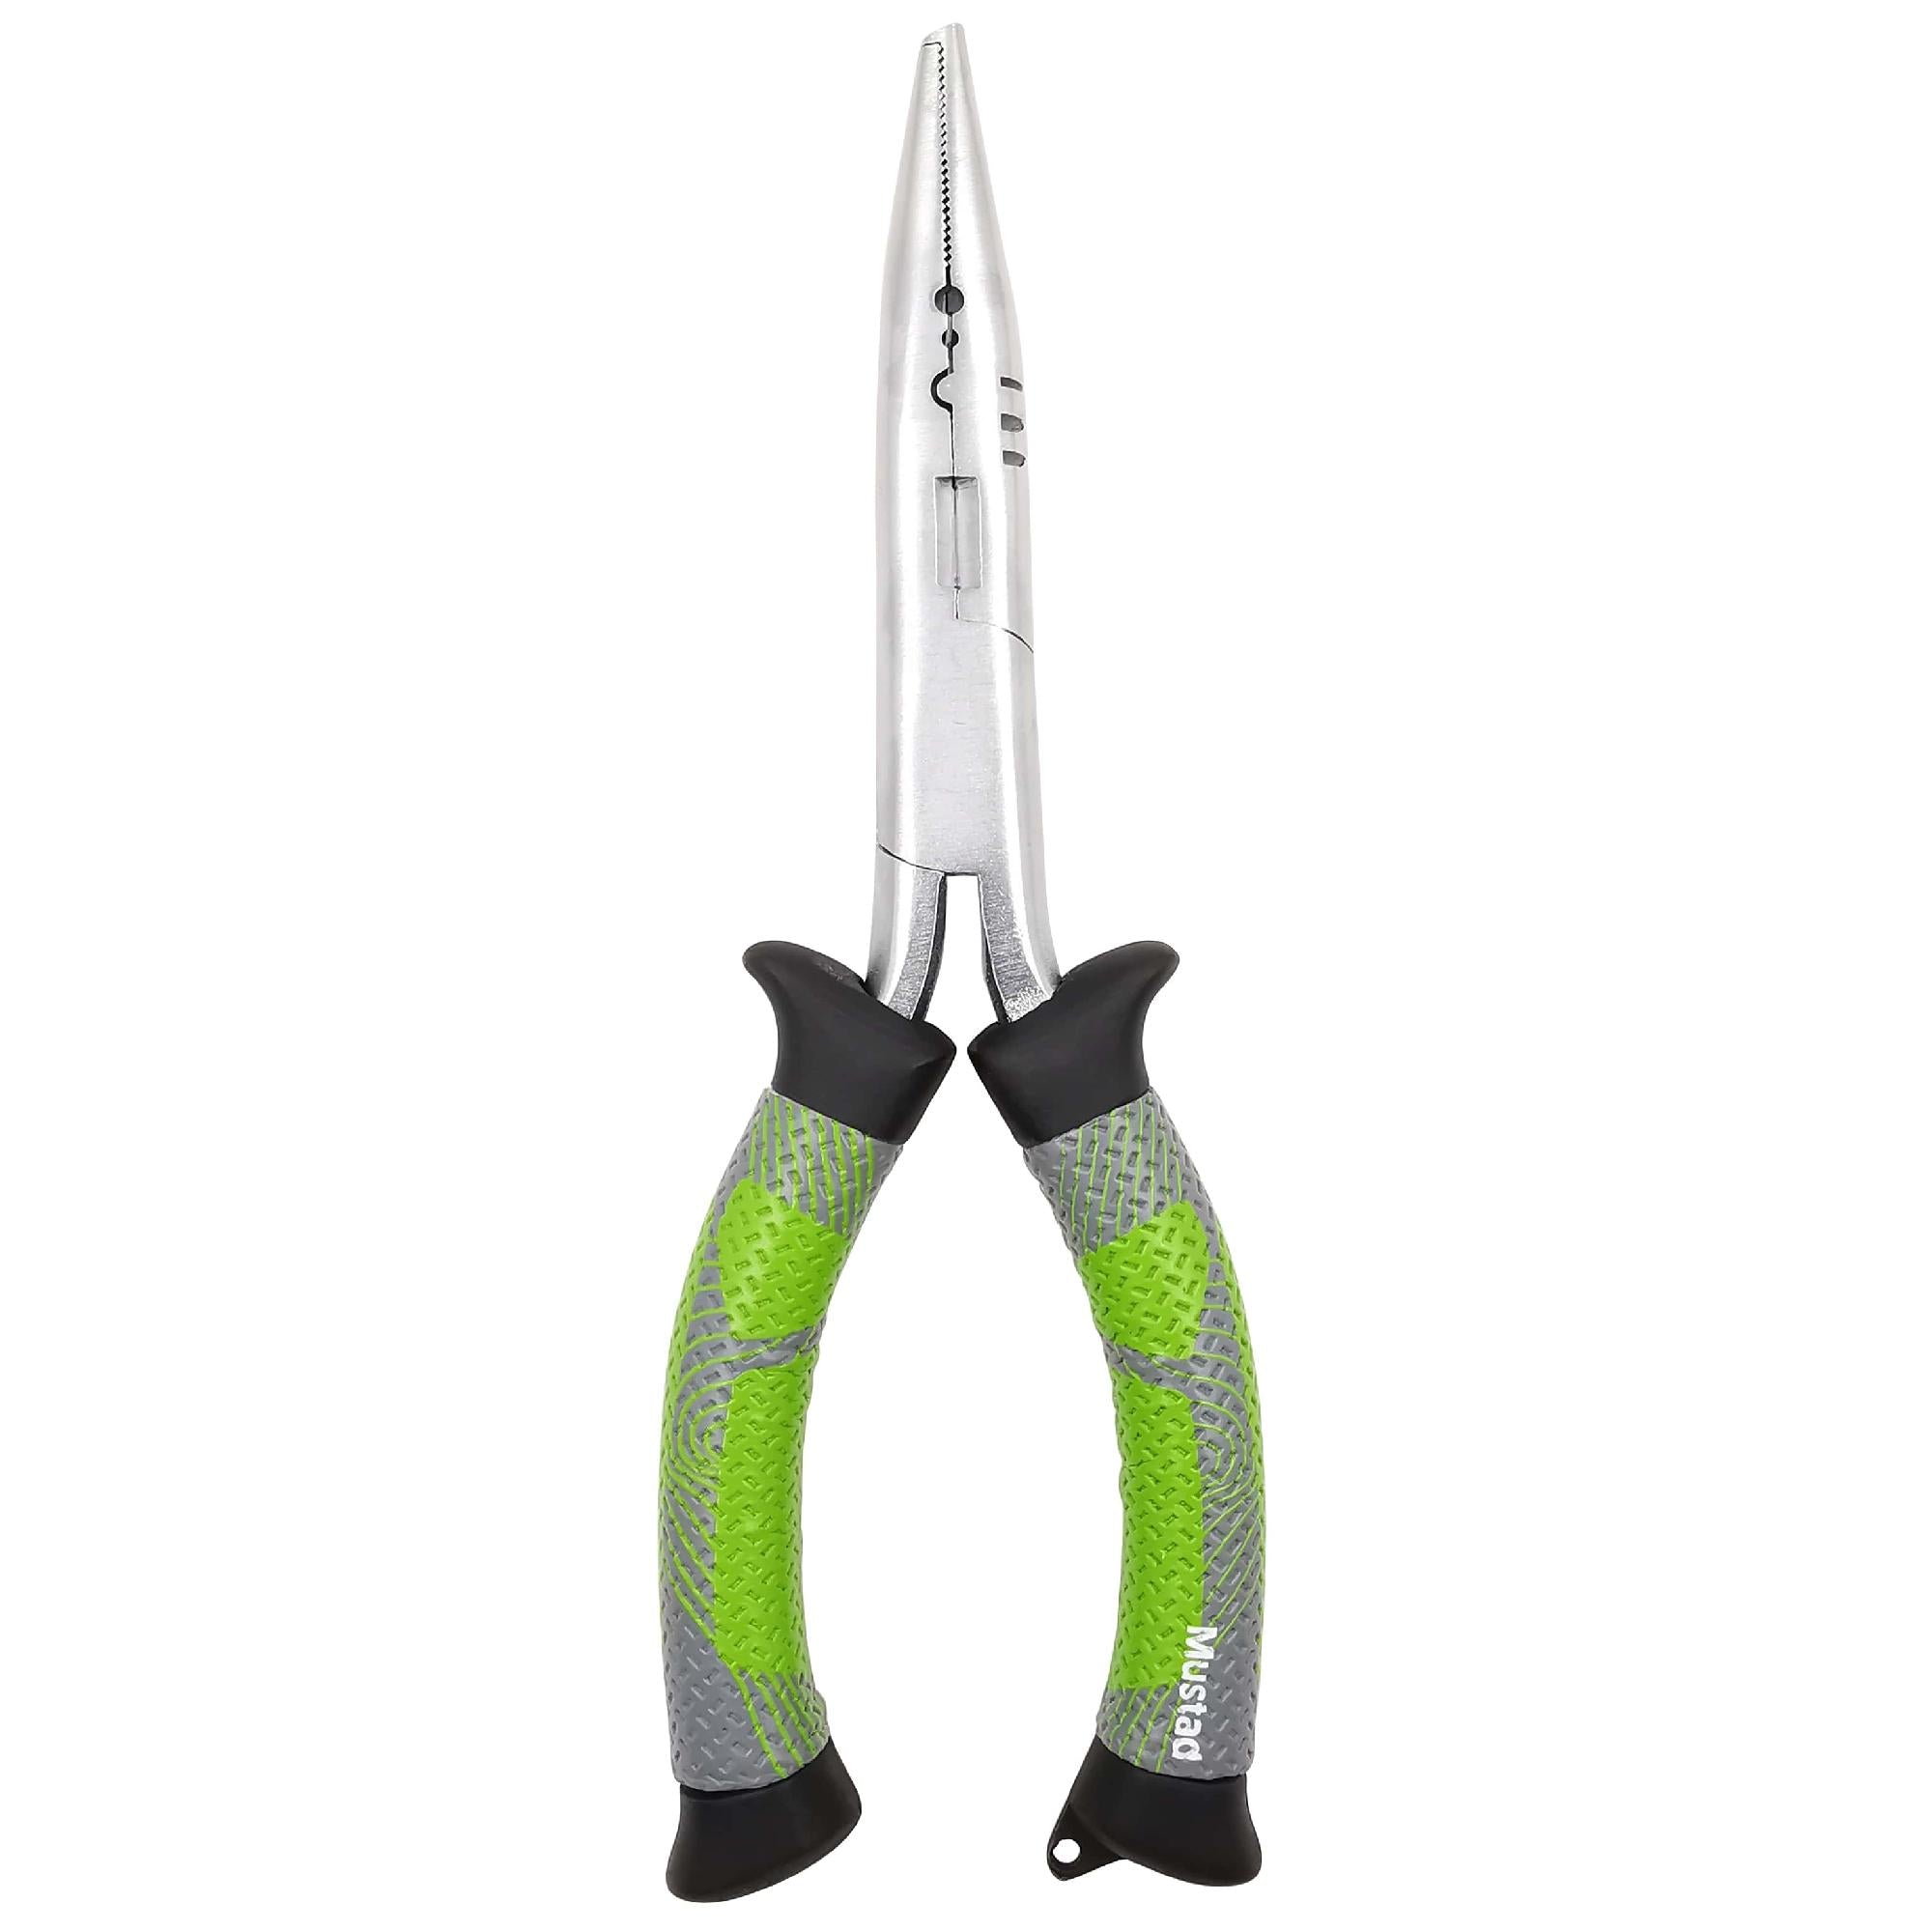 Fishing Pliers for sale